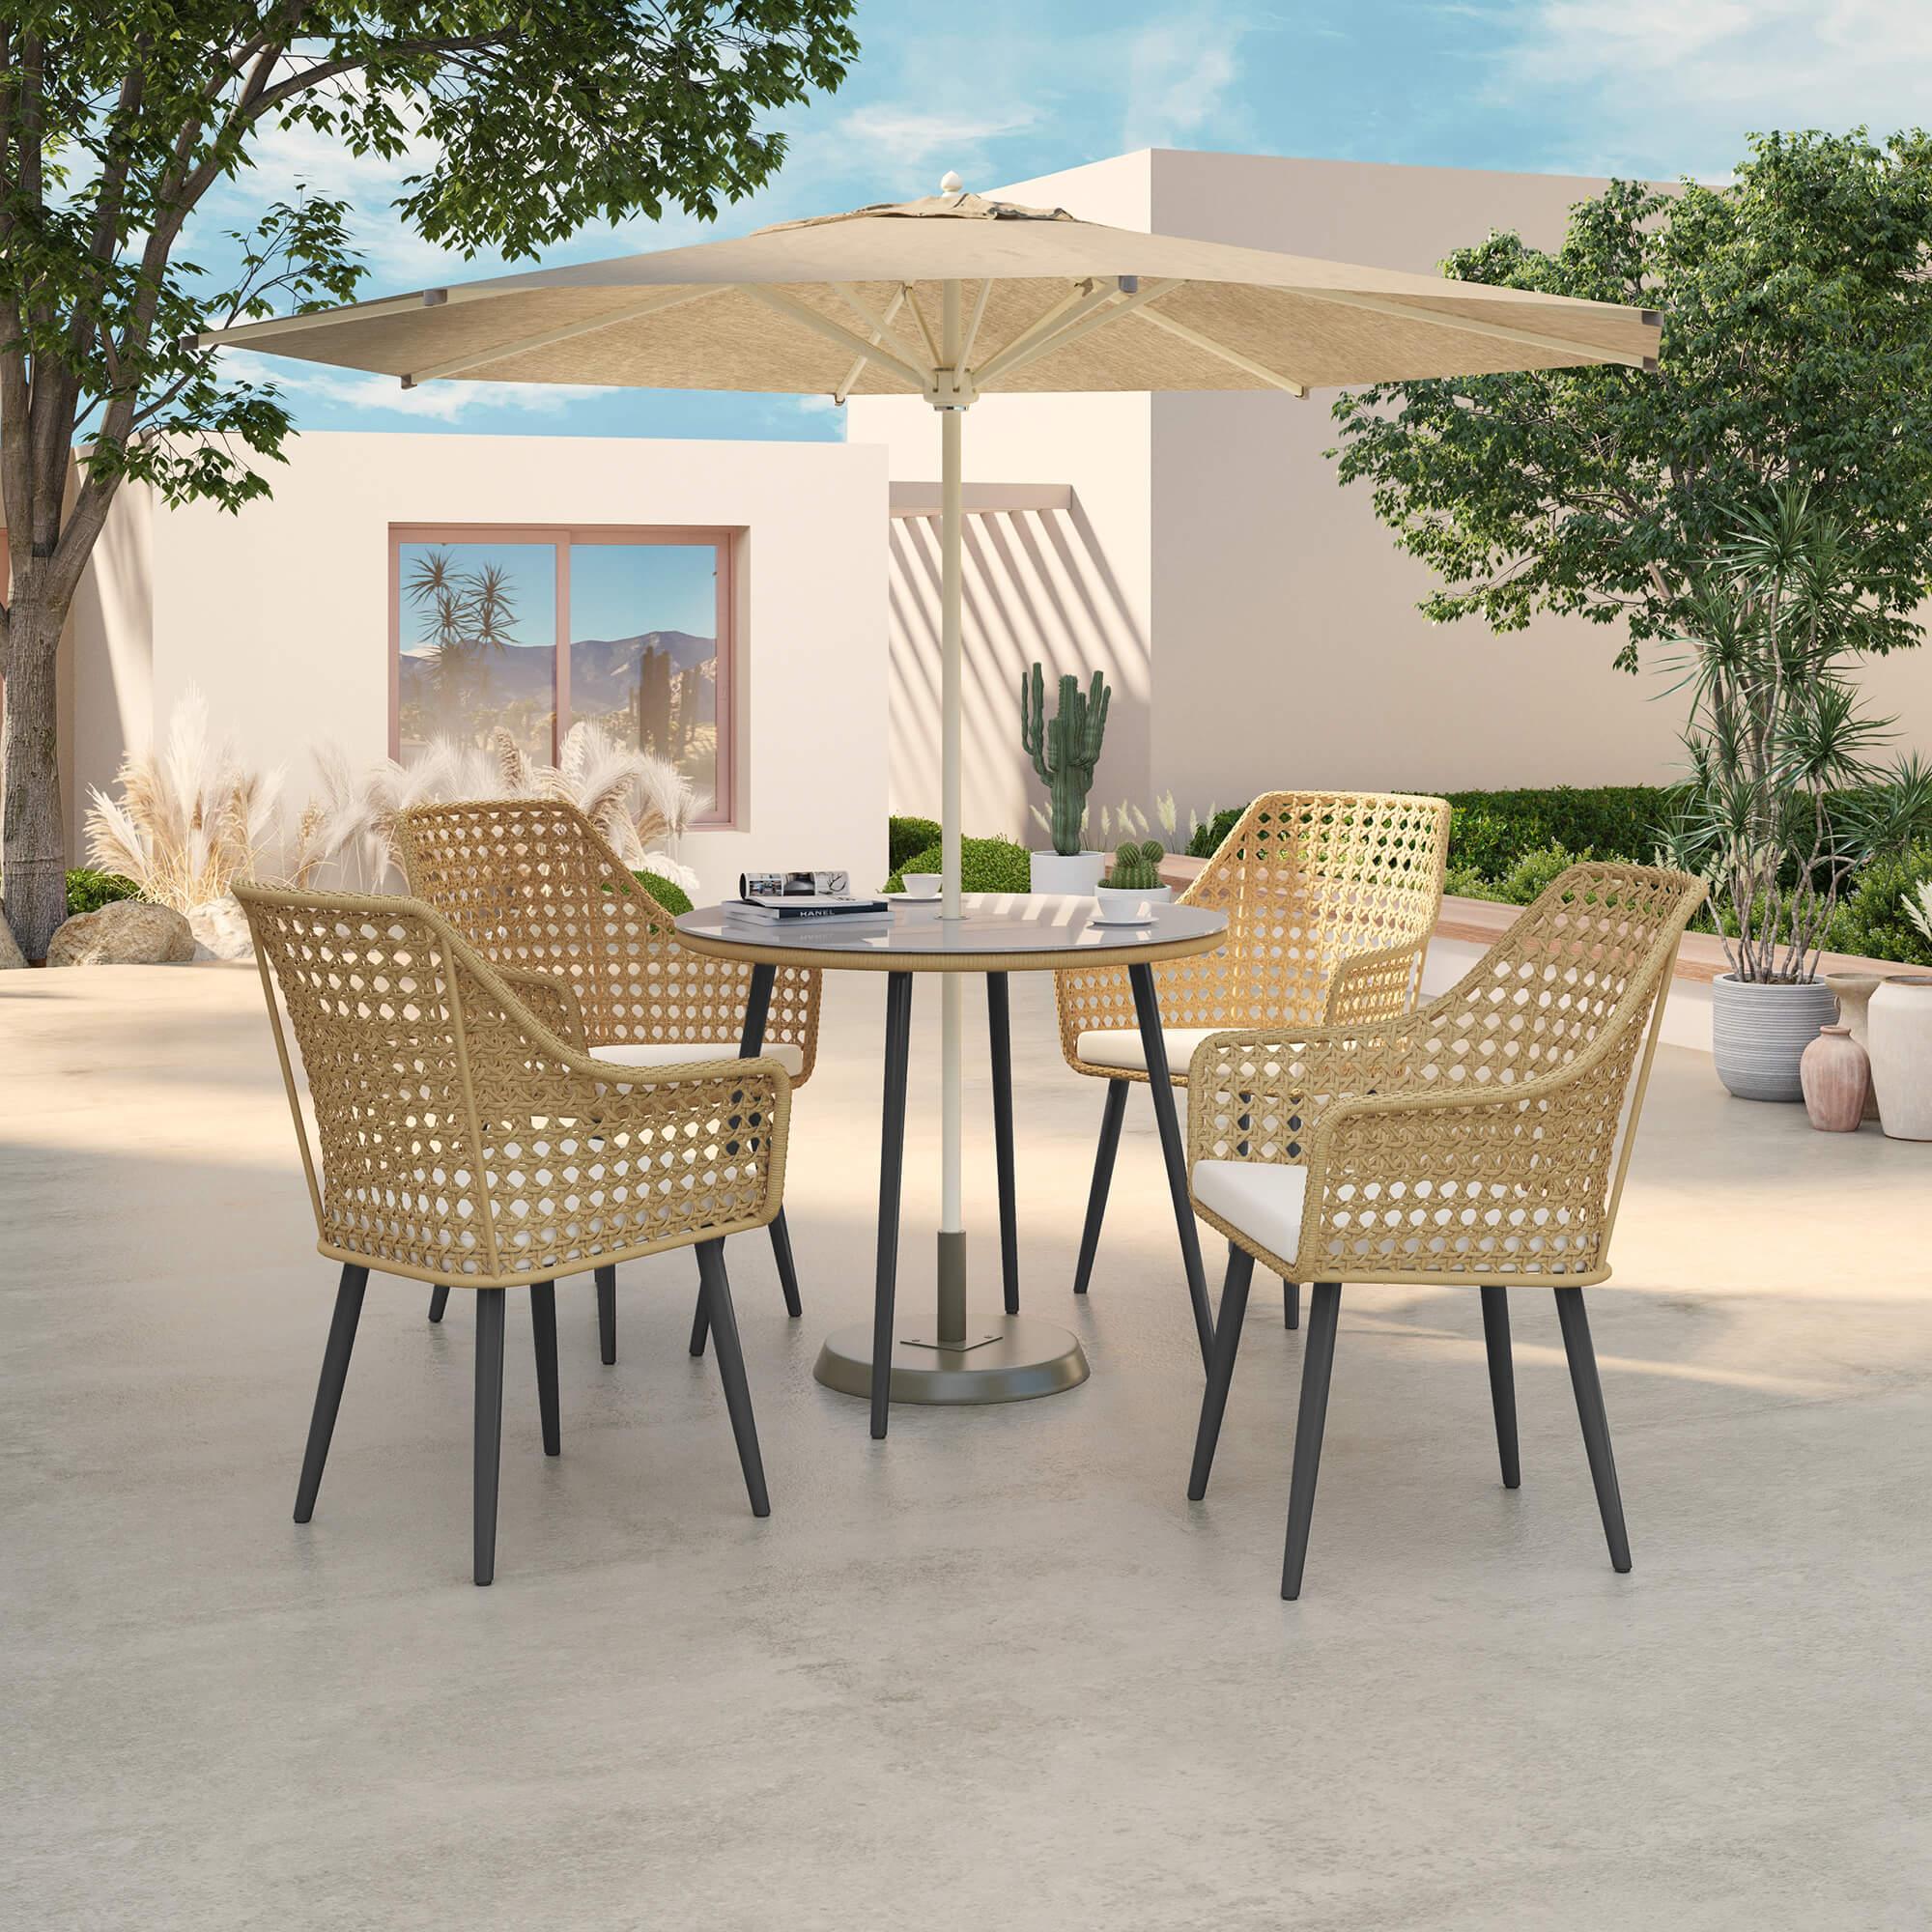 Menorca 5-Piece Wicker Outdoor Dining Set with aluminum frame, white cushions, Round Dining Table with Tempered Glass and umbrella hole, white umbrella, in the garden Jardina Furniture